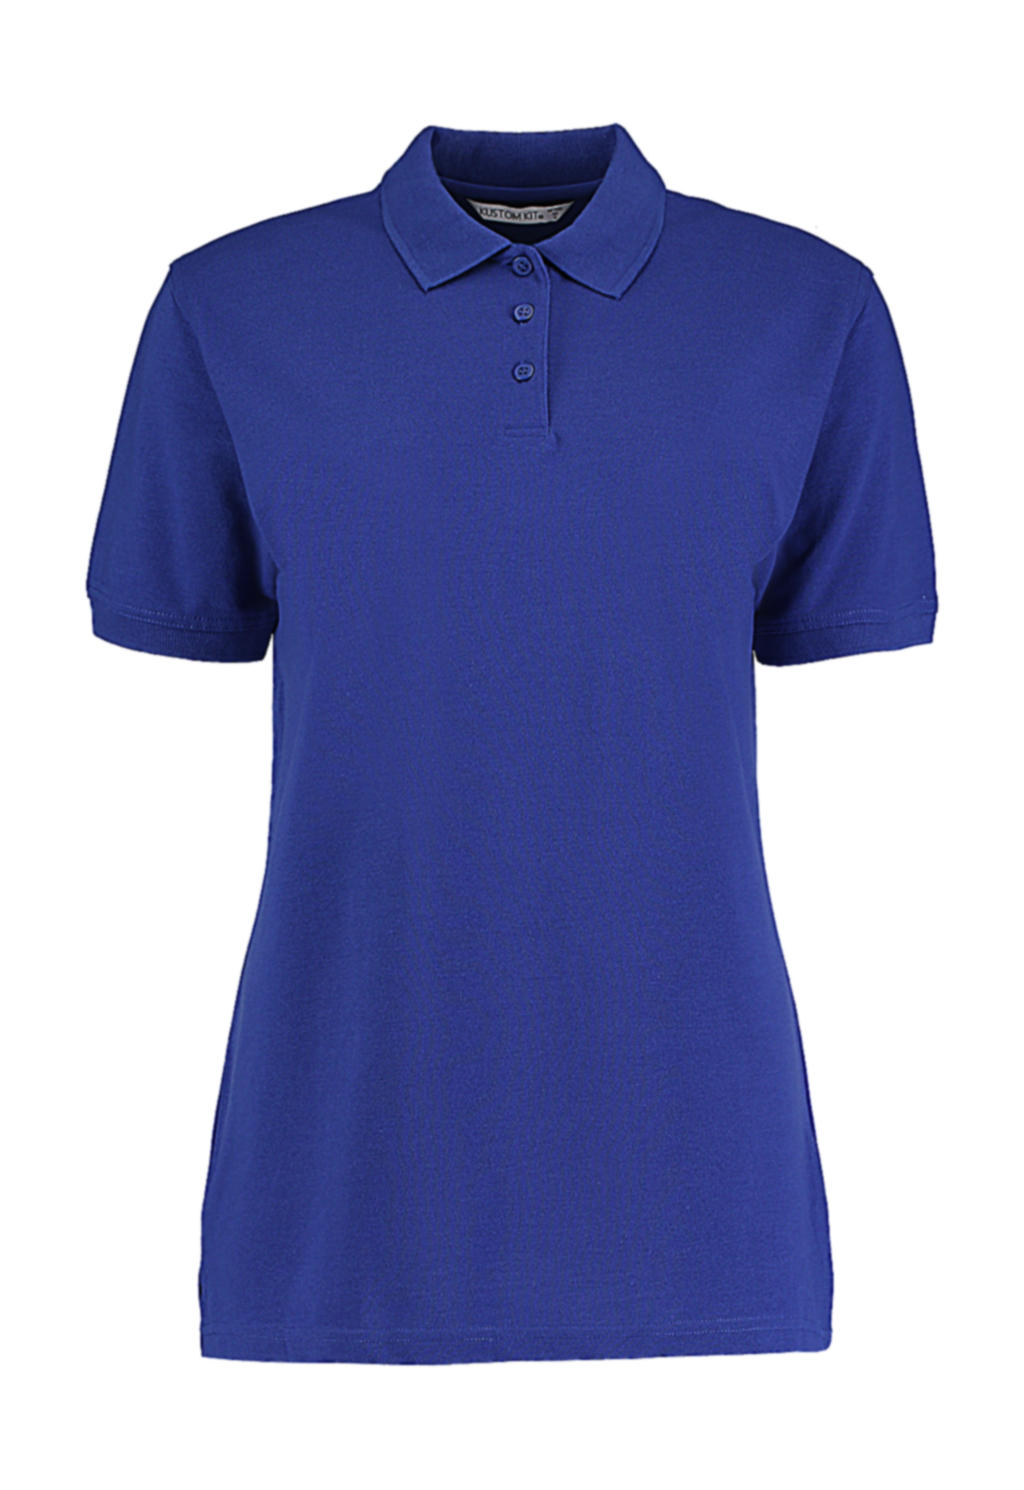  Ladies Classic Fit Polo Superwash? 60? in Farbe Royal